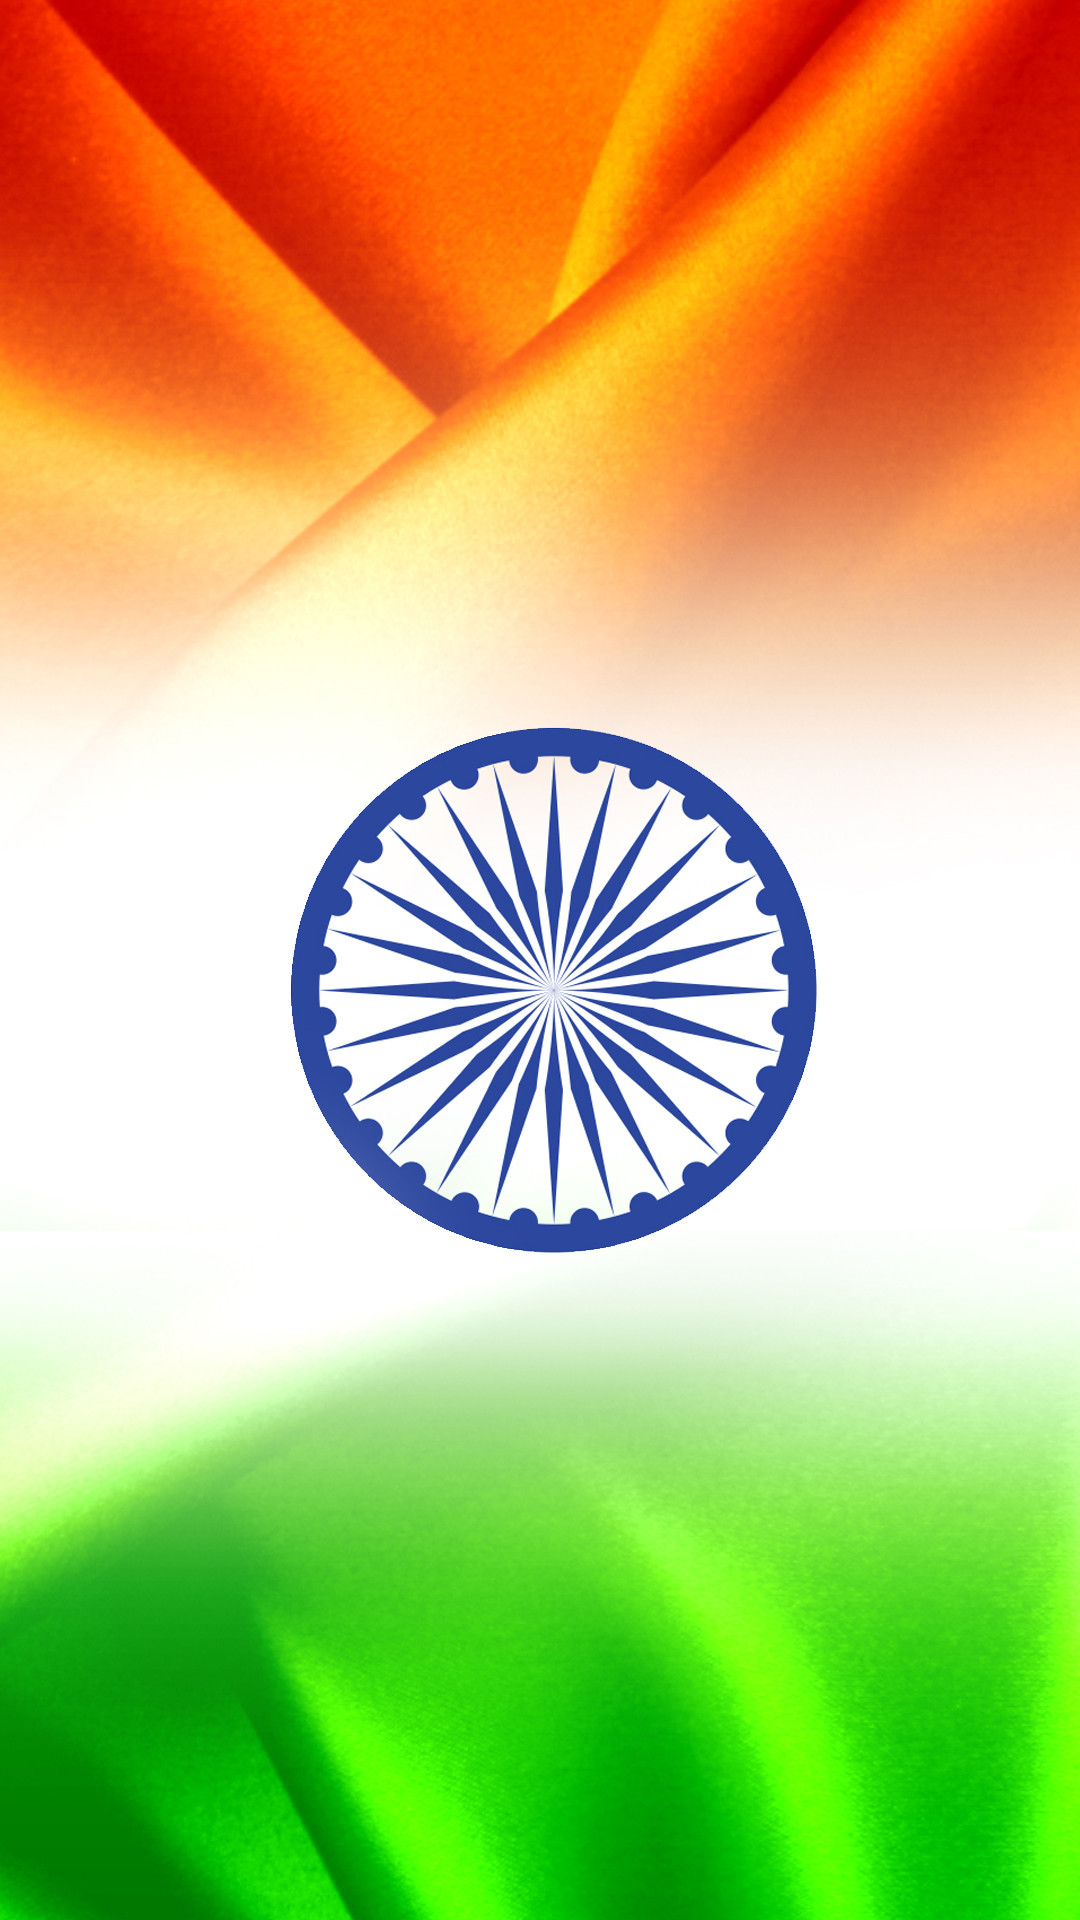 1080x1920 ... India Flag for Mobile Phone Wallpaper 11 of 17 - Tricolour India Flag